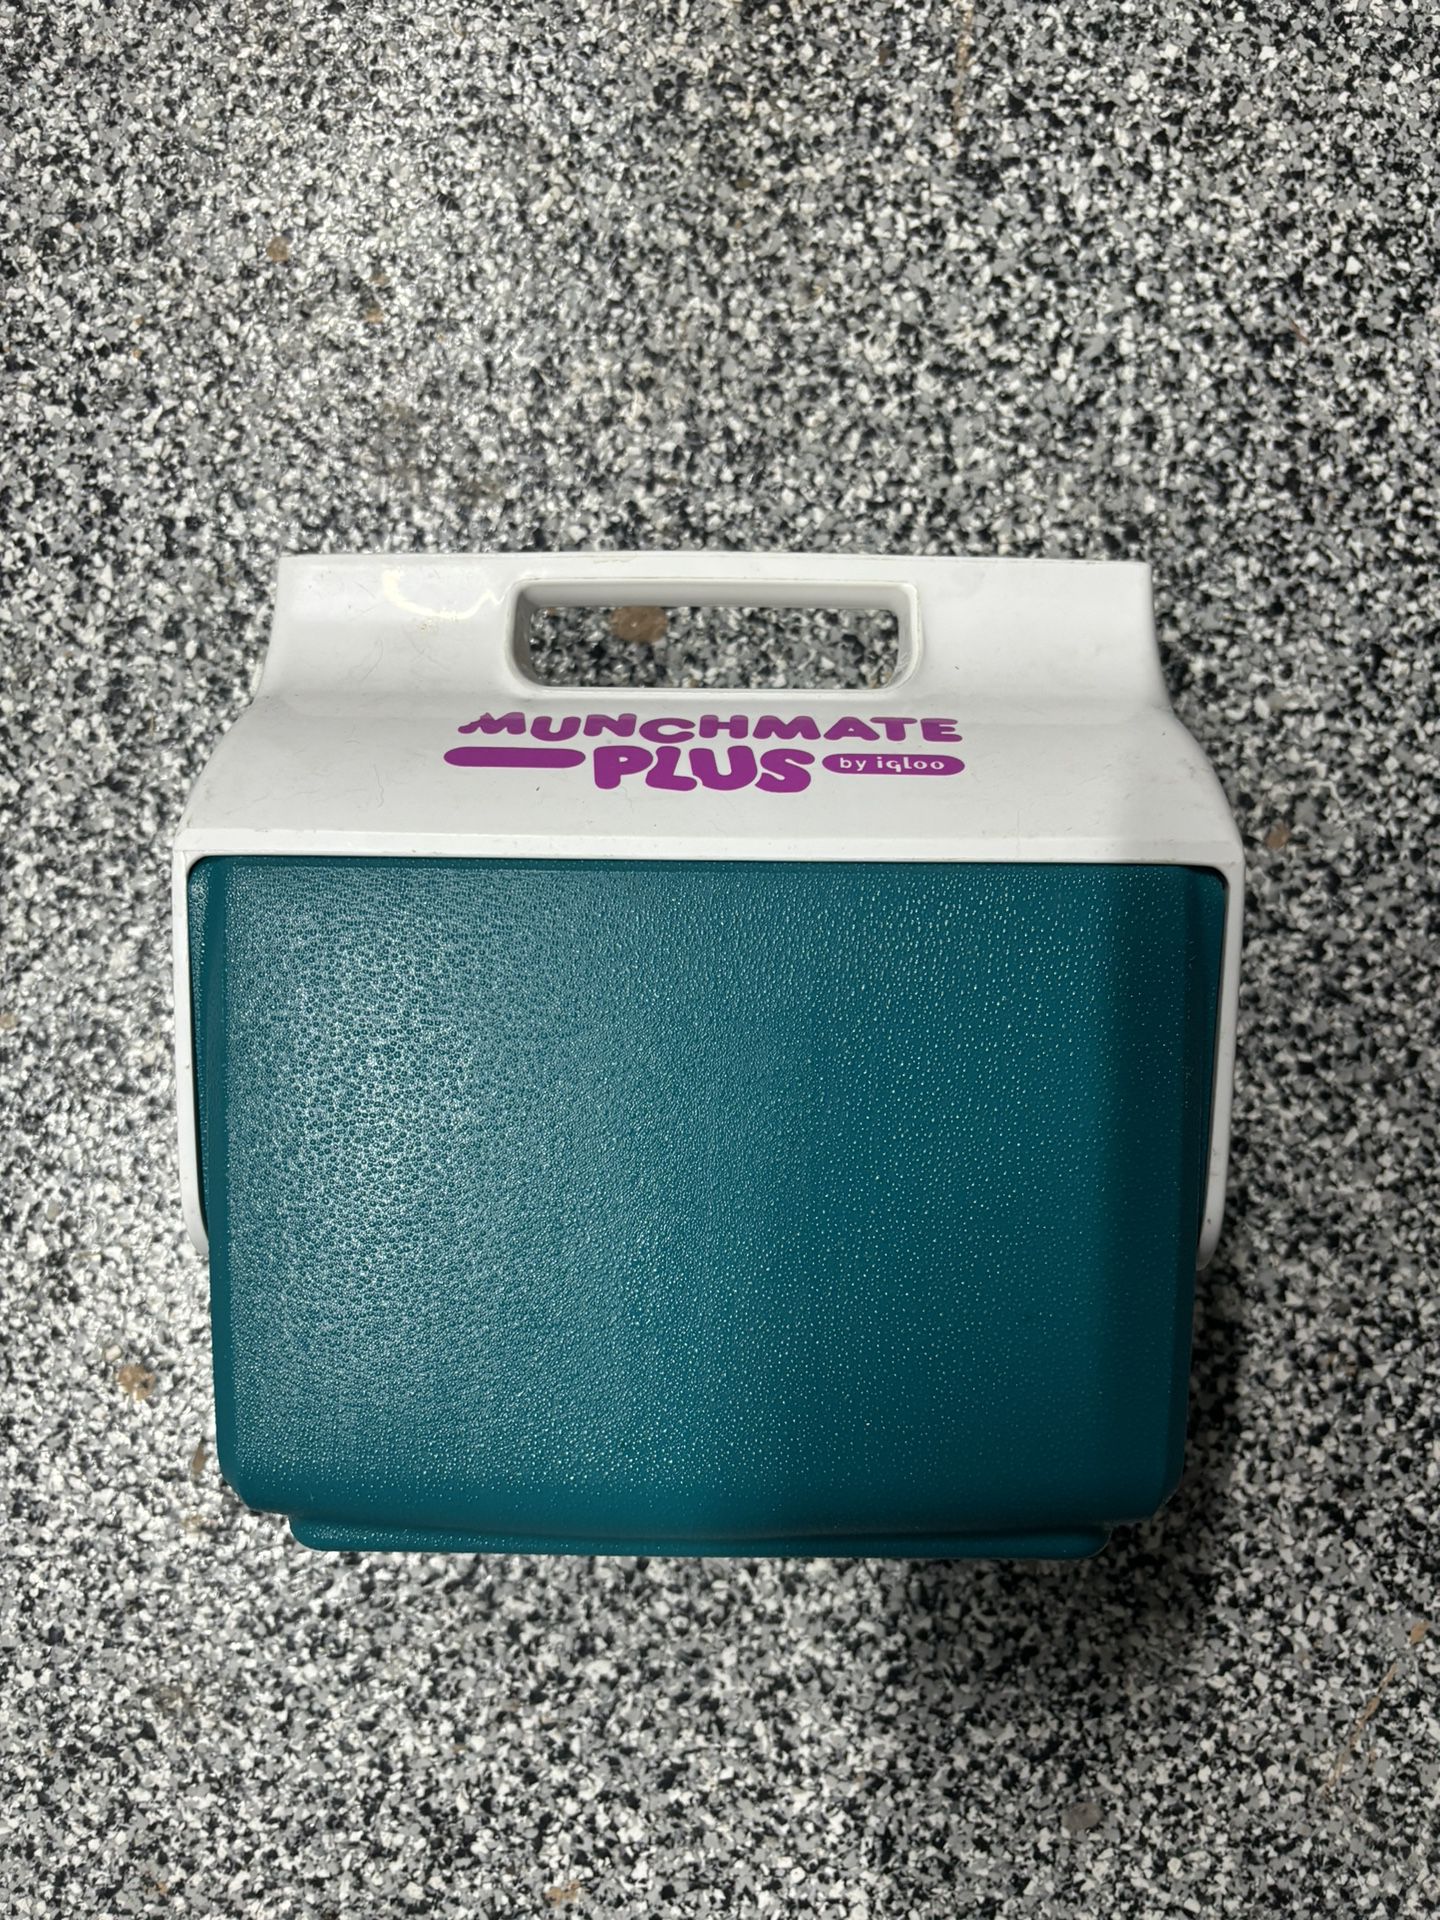 Igloo munchmate Cooler For Lunch, Retro Vintage Look 